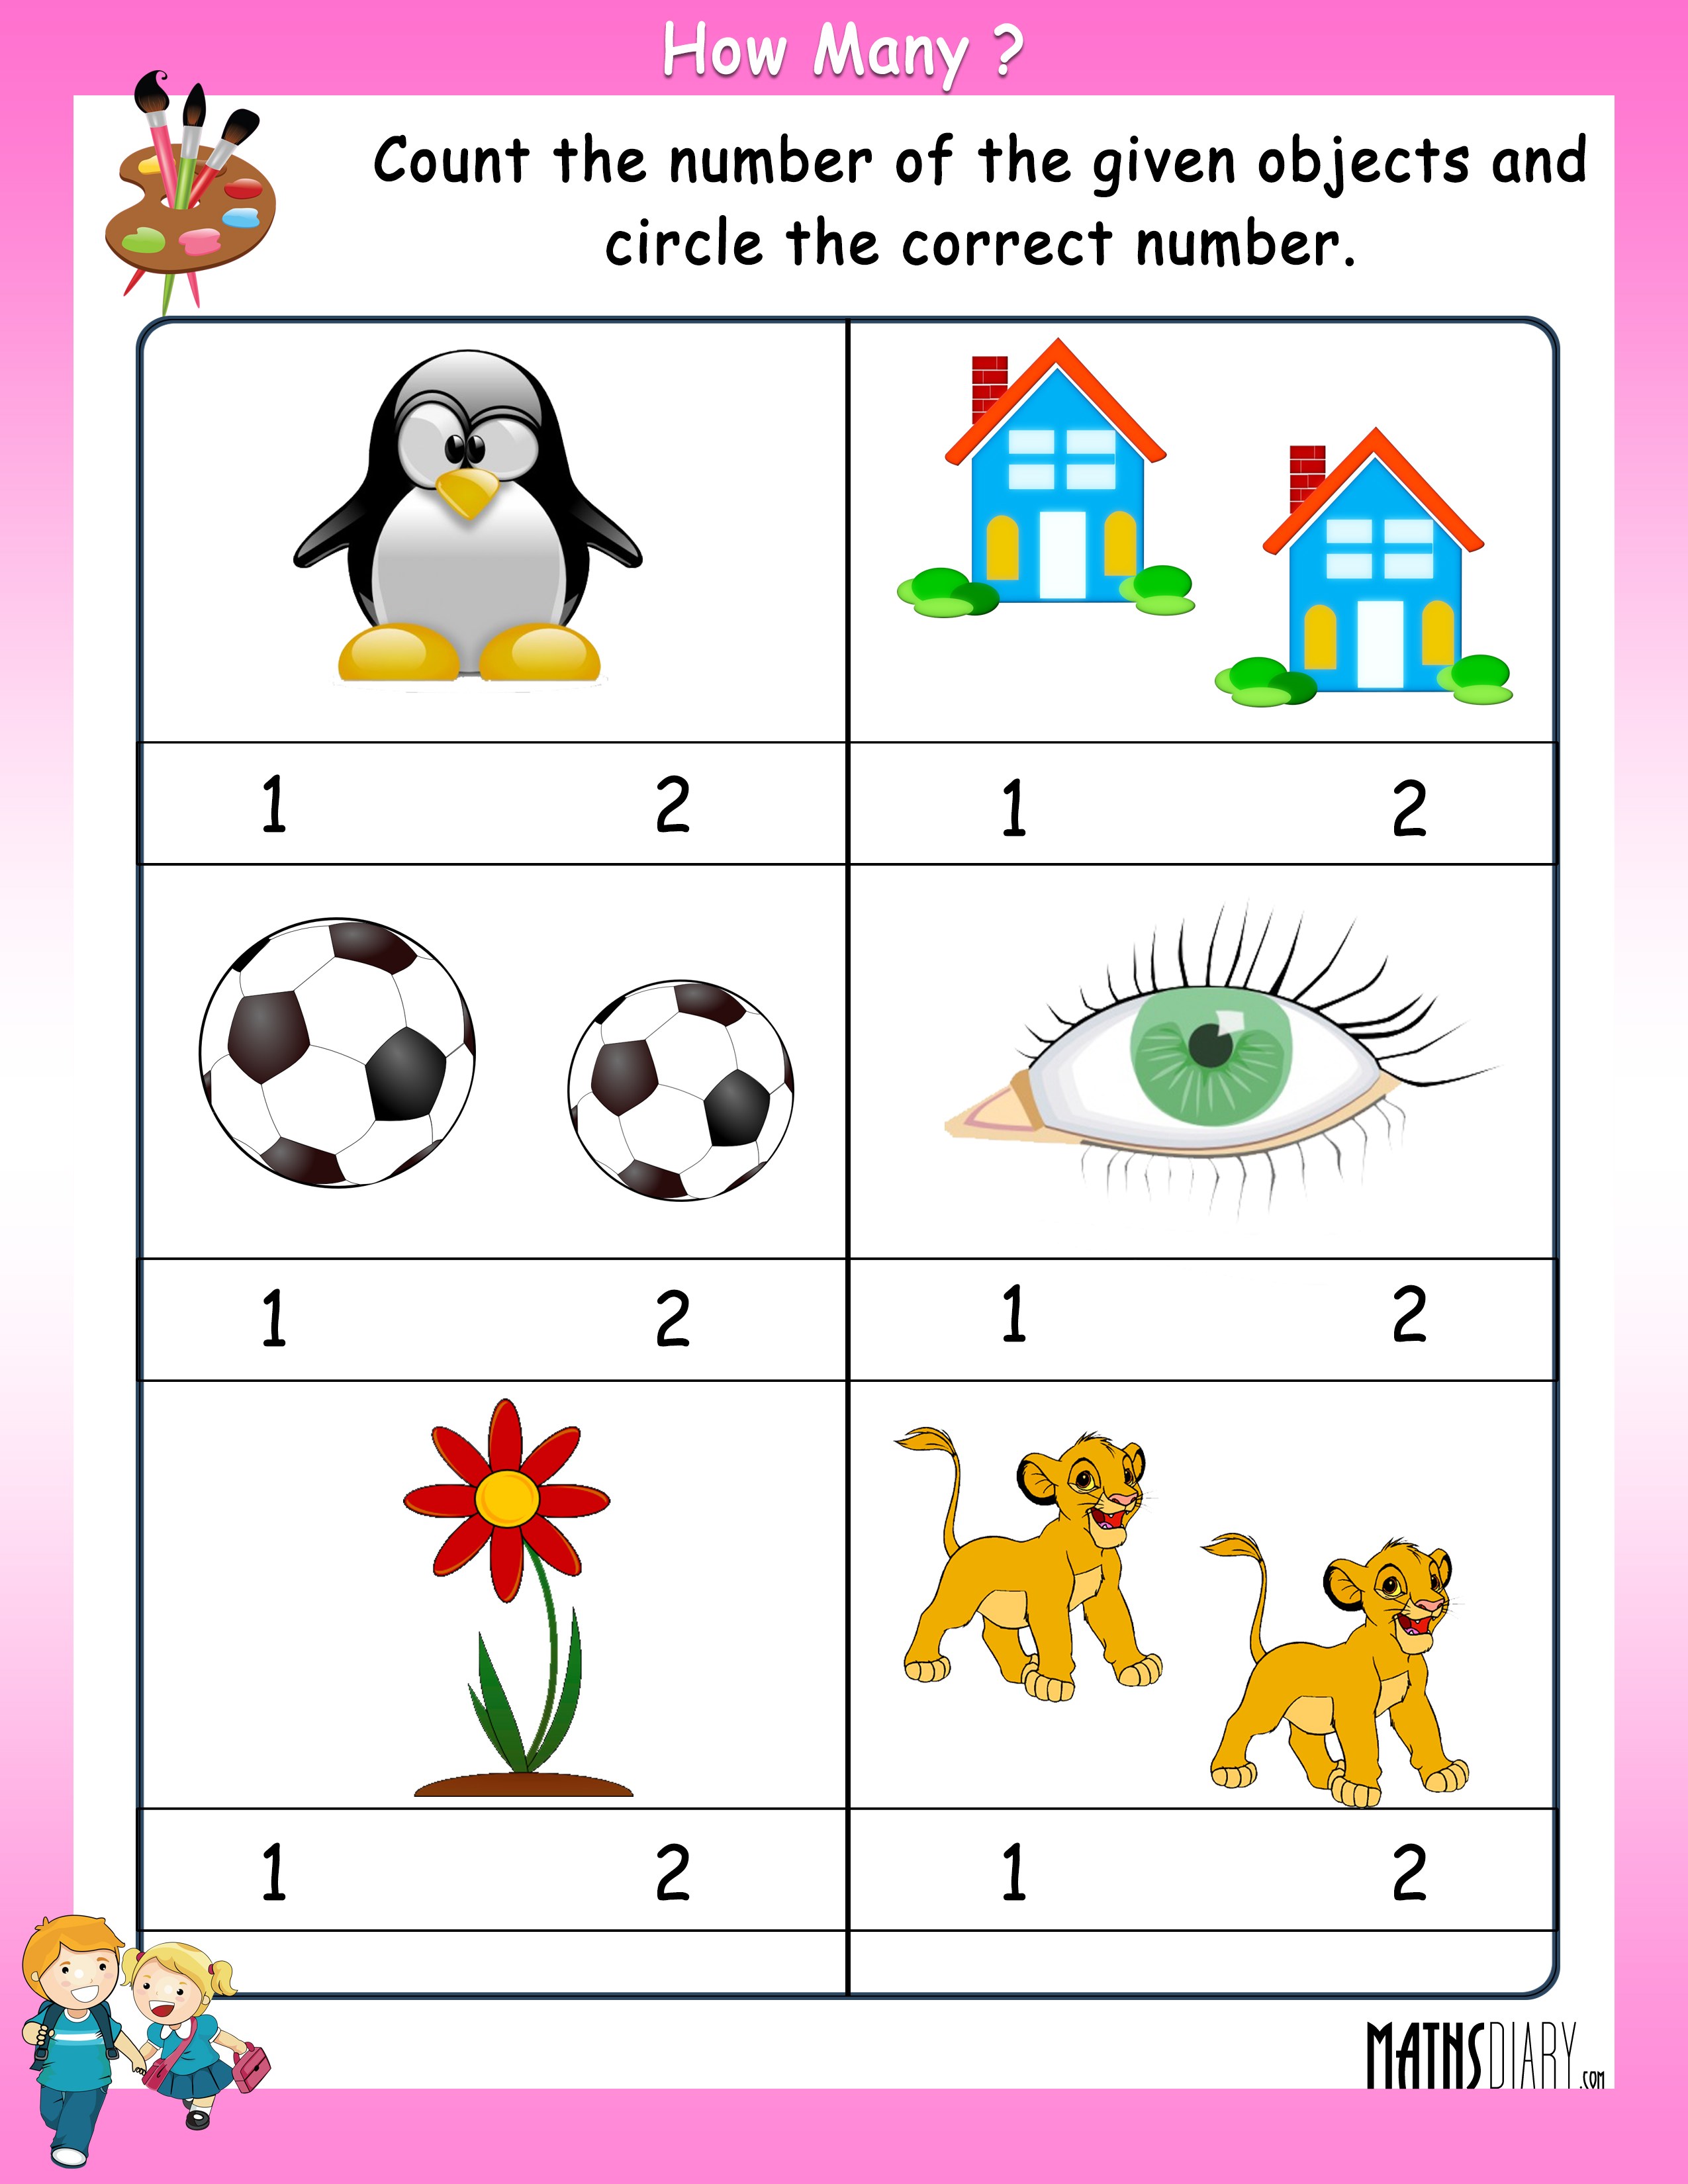 counting-ukg-math-worksheets-page-2